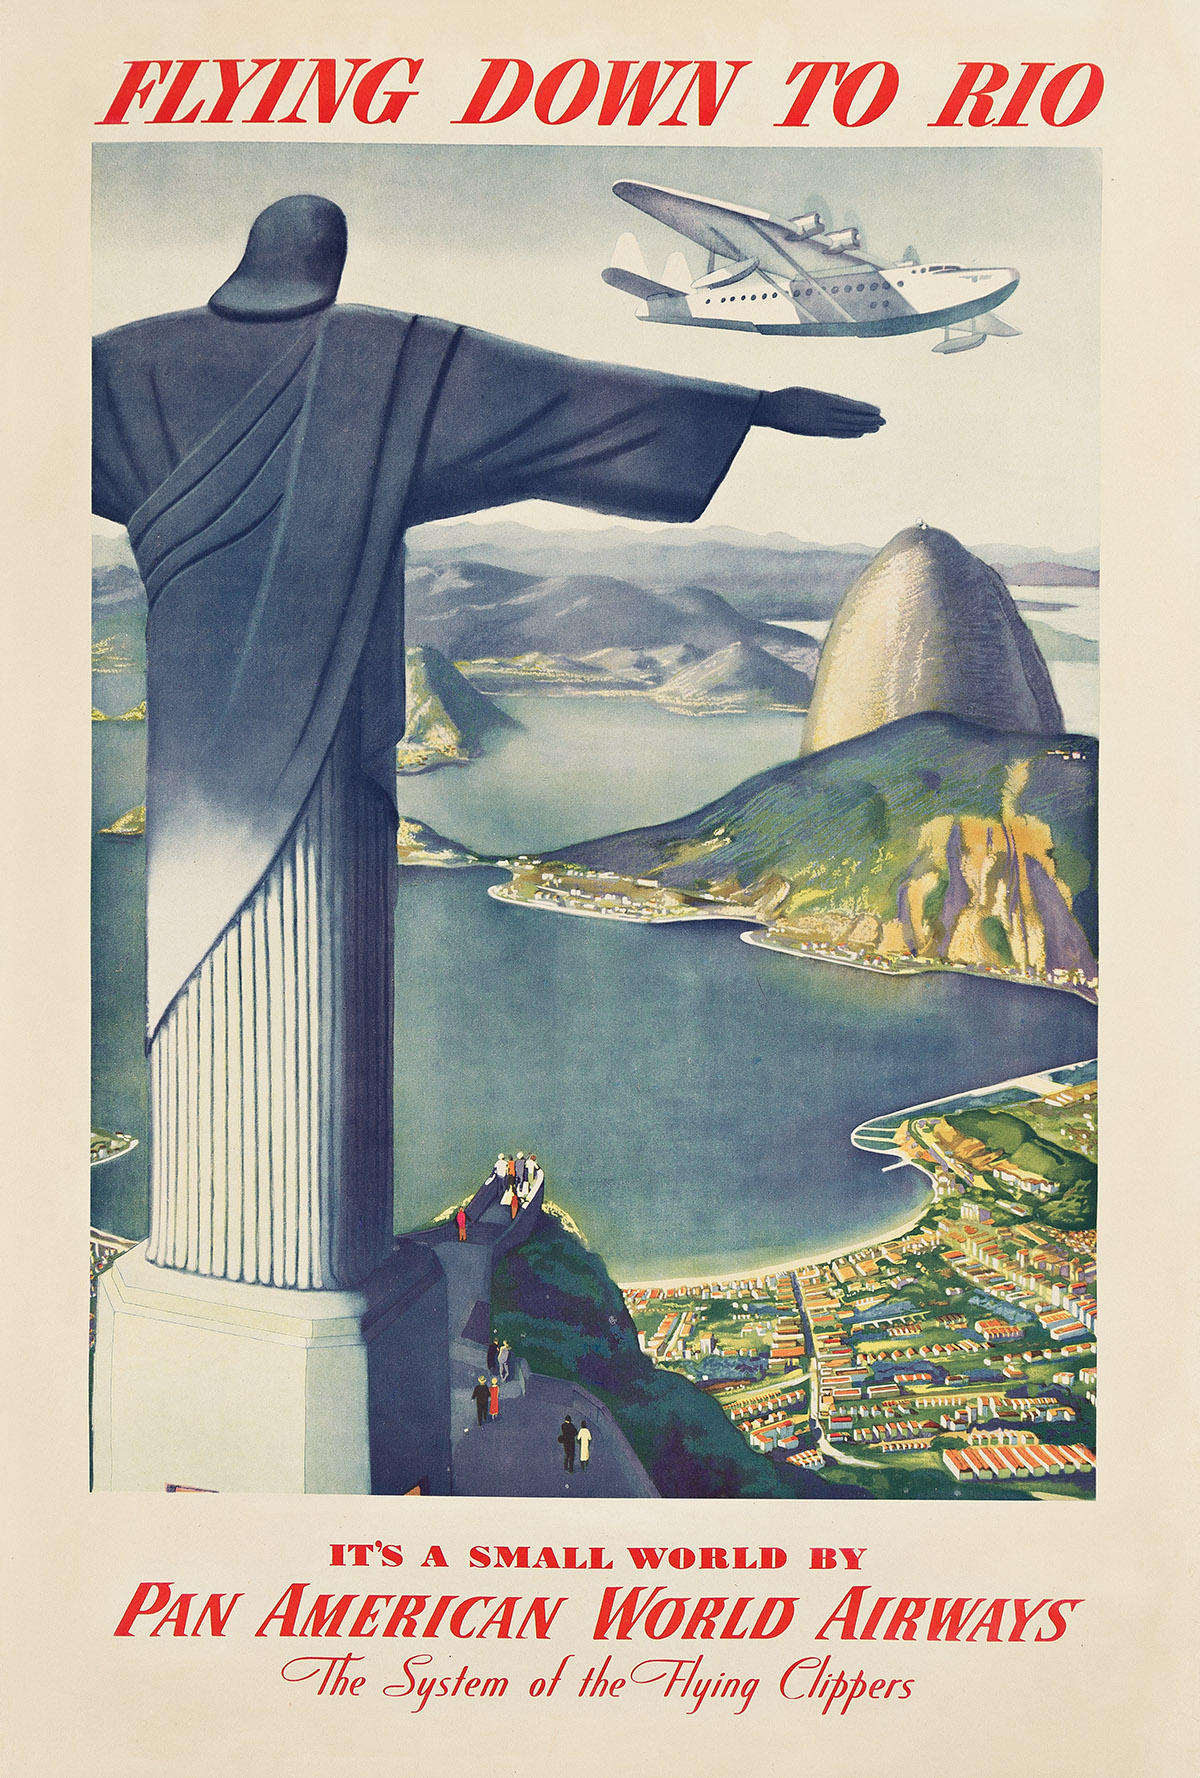 PAUL GEORGE LAWLER (DATES UNKNOWN).  FLYING DOWN TO RIO / ITS A SMALL WORLD BY PAN AMERICAN WORLD AIRWAYS. Circa 1938. 40¾x27½ inches,